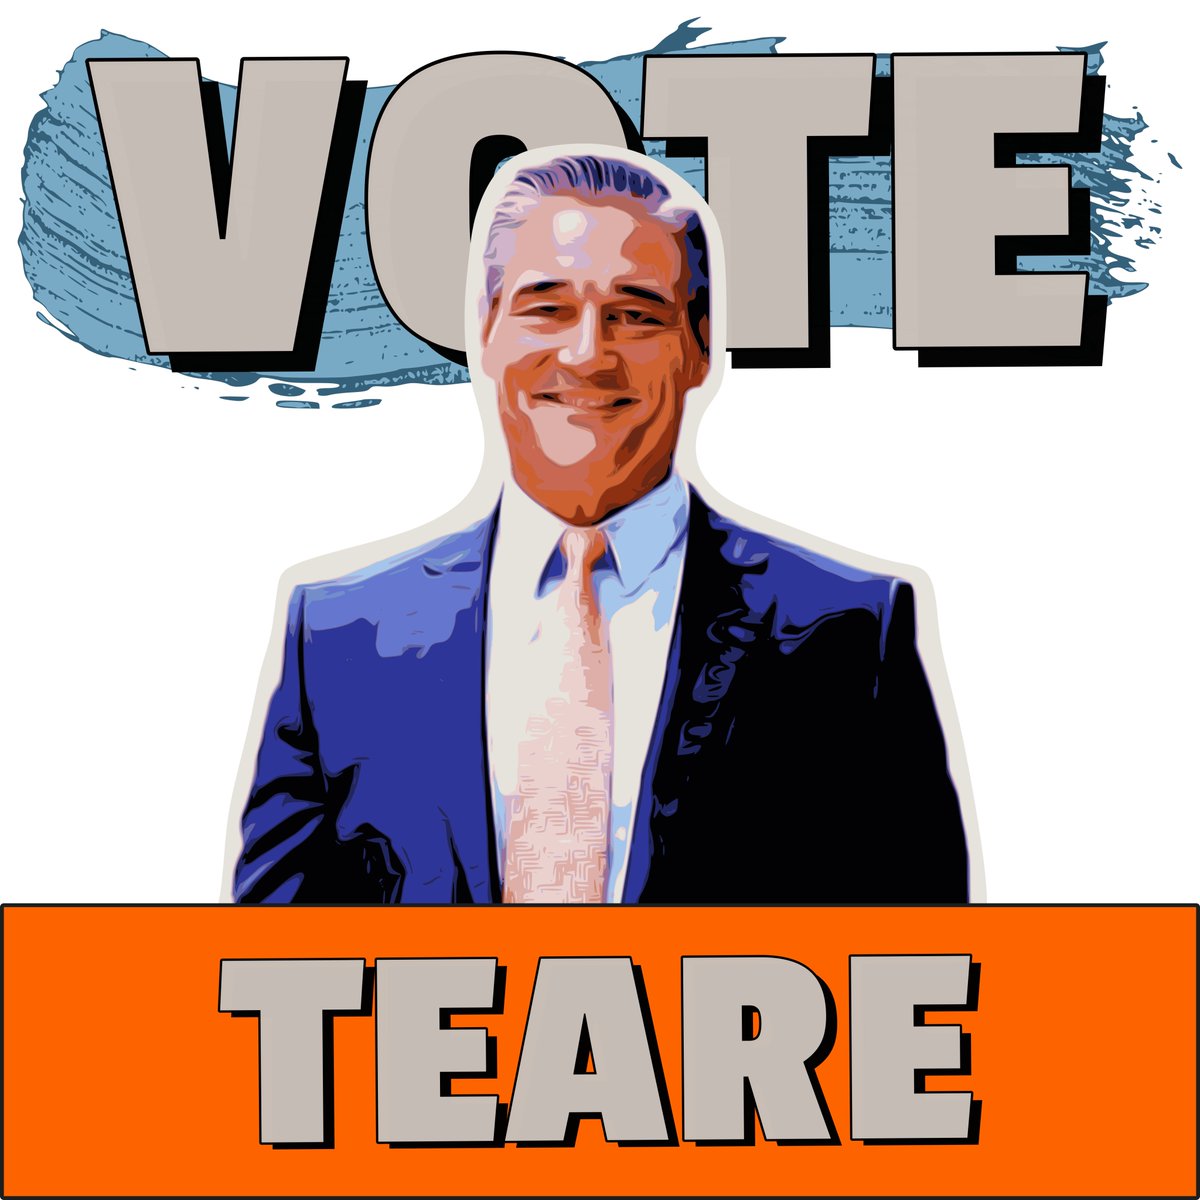 The TLDR is -DA Kim Ogg consorted w/vote suppressing Republicans -on public dime -to investigate Dems -lied about it -covered it up -maintains personal friendships with the ppl she paid to do it -and hires vote suppressor for daytime work. Y'all... vote @SeanTeareforDA.